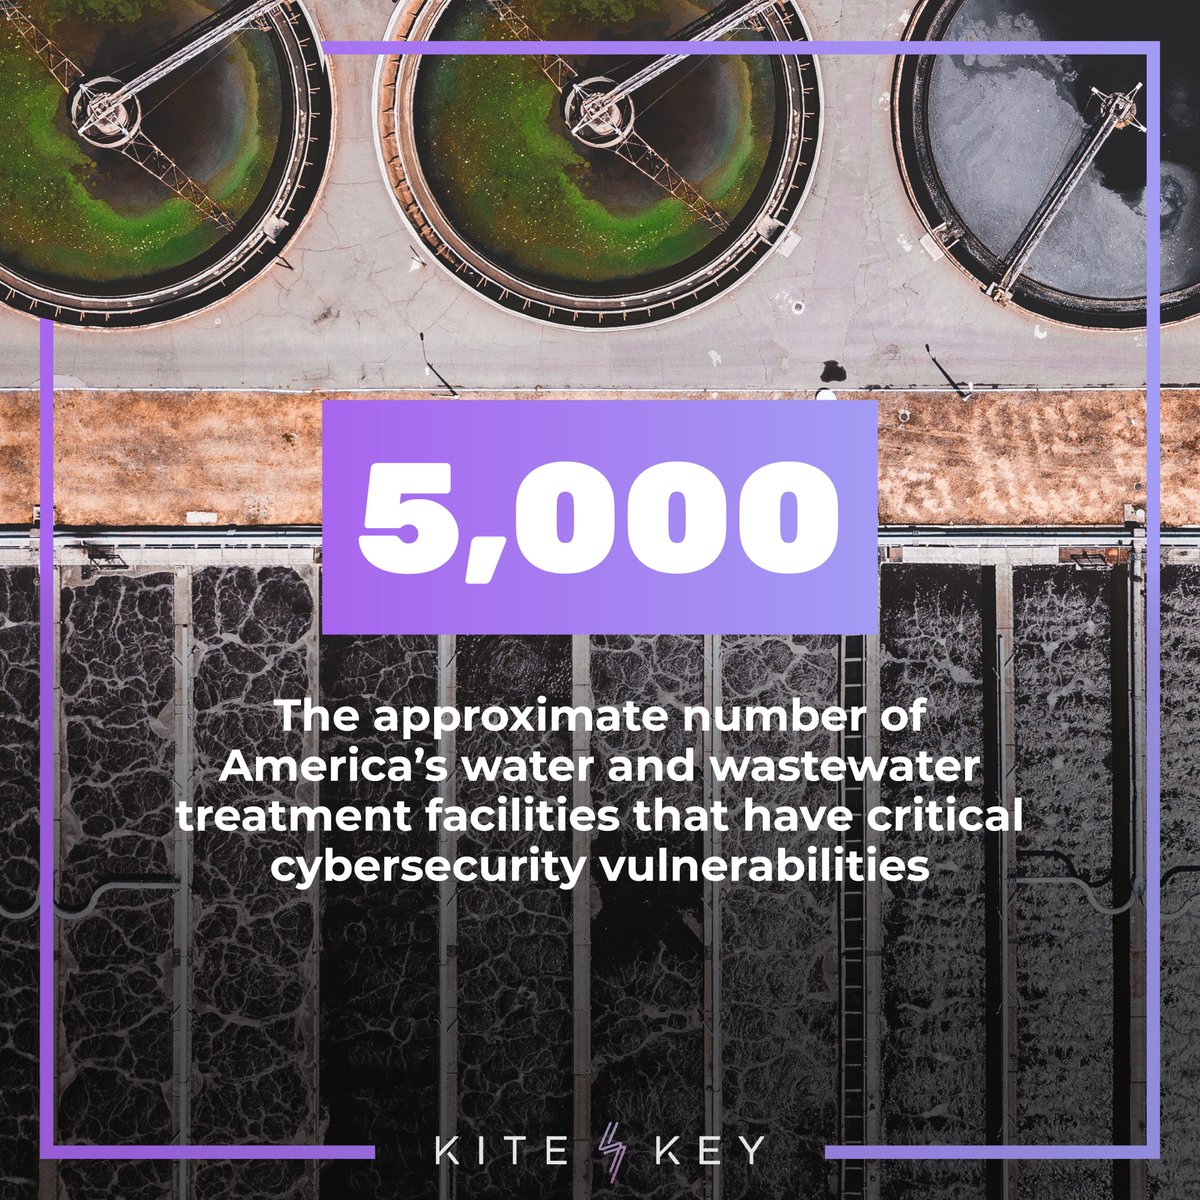 A 2021 government study found that 1 in 10 of America’s water and wastewater treatment facilities — about 5,000 locations — had critical cybersecurity vulnerabilities. Approximately 80% of those problems are because software hasn’t been updated. ➡️ youtu.be/0ABBN1yj0Ao